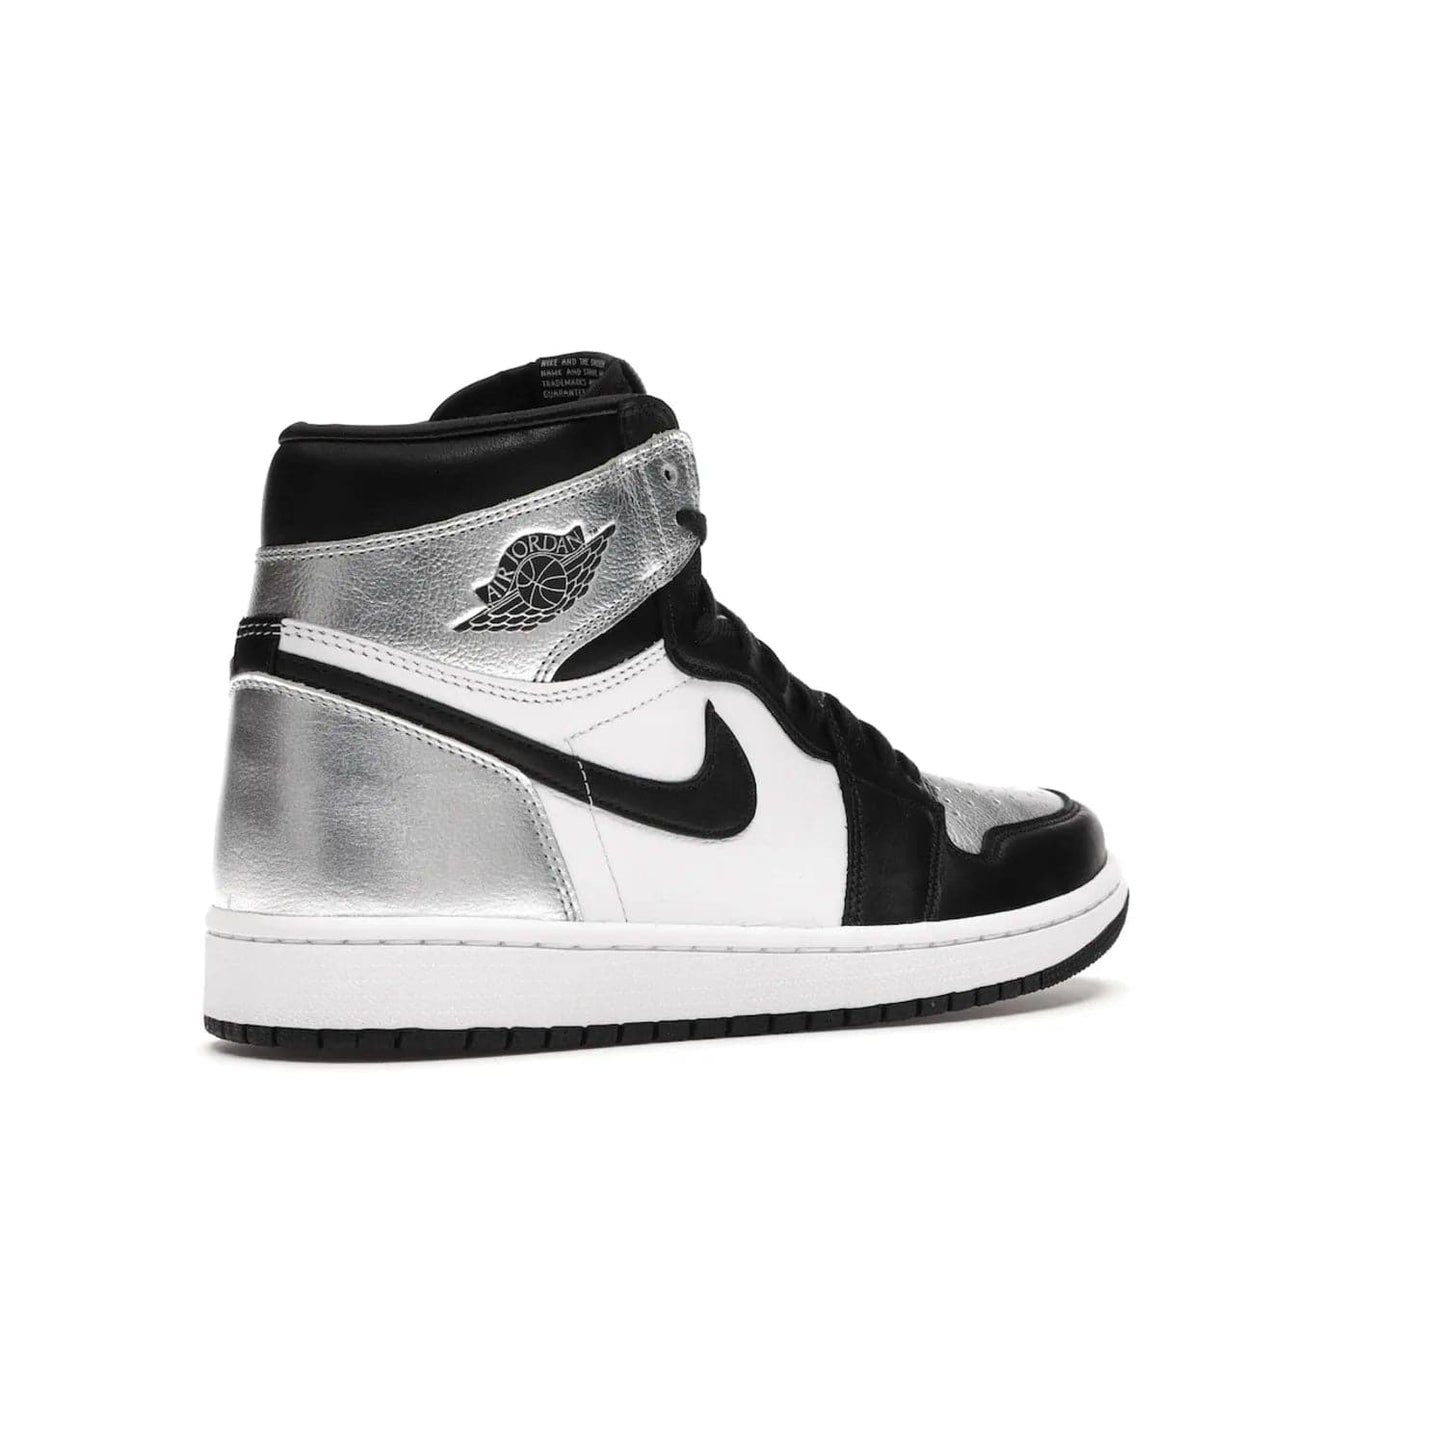 Jordan 1 Retro High Silver Toe (Women's) - Image 33 - Only at www.BallersClubKickz.com - Introducing the Jordan 1 Retro High Silver Toe (Women's): an updated spin on the iconic 'Black Toe' theme. Featuring white & black leather and silver patent leather construction. Nike Air branding, Air Jordan Wings logo, and white/black sole finish give a classic look. The perfect addition to an on-trend streetwear look. Available in classic black & white, this Jordan 1 is an instant classic. Released in February 20